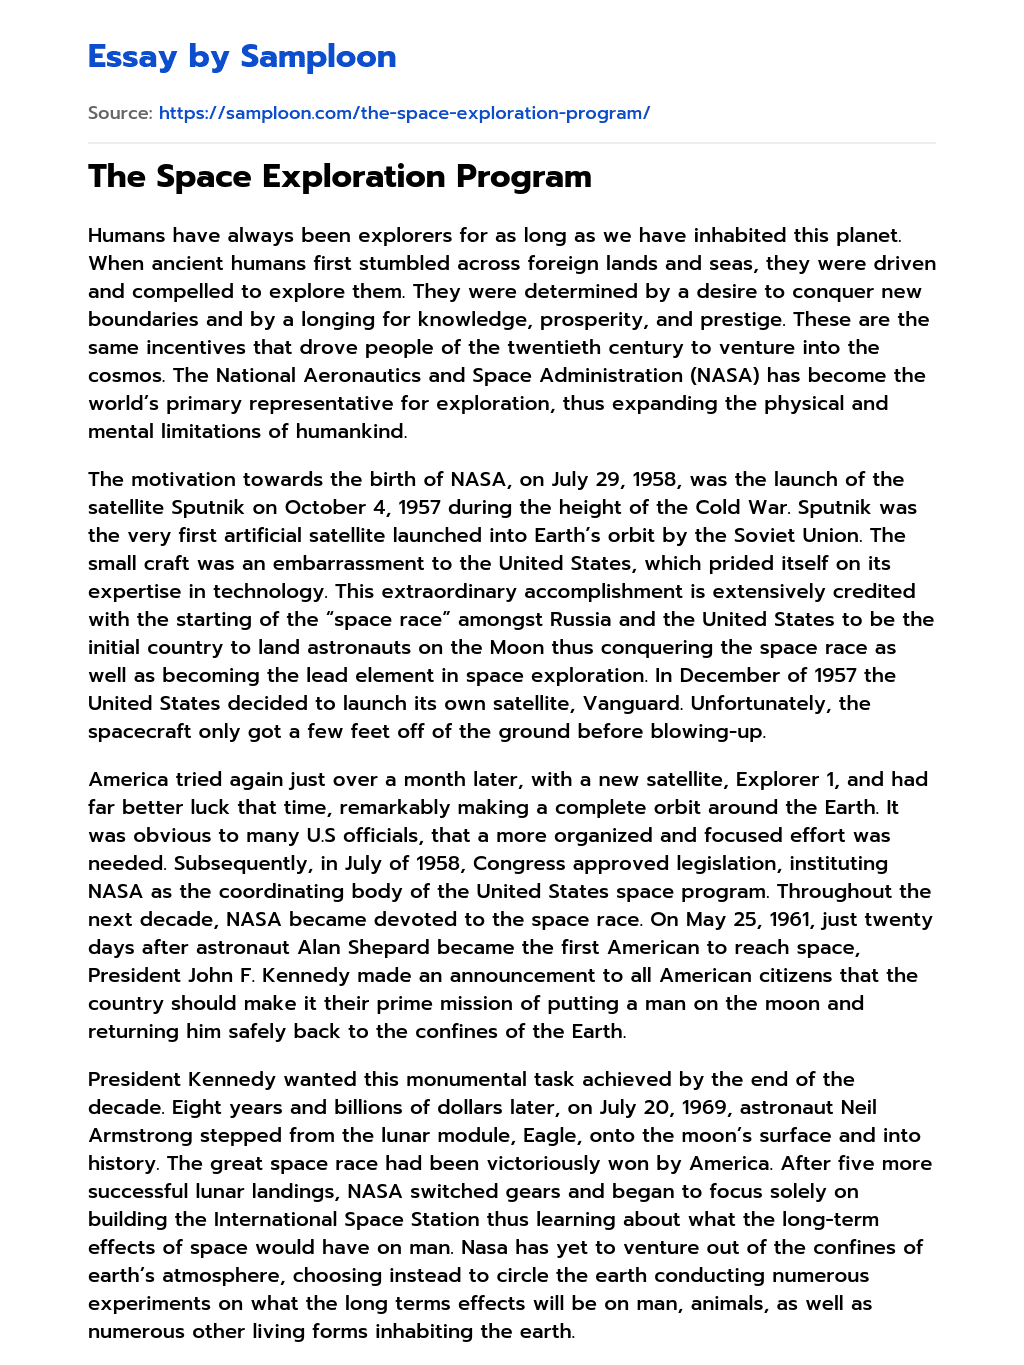 essay on visit to space station